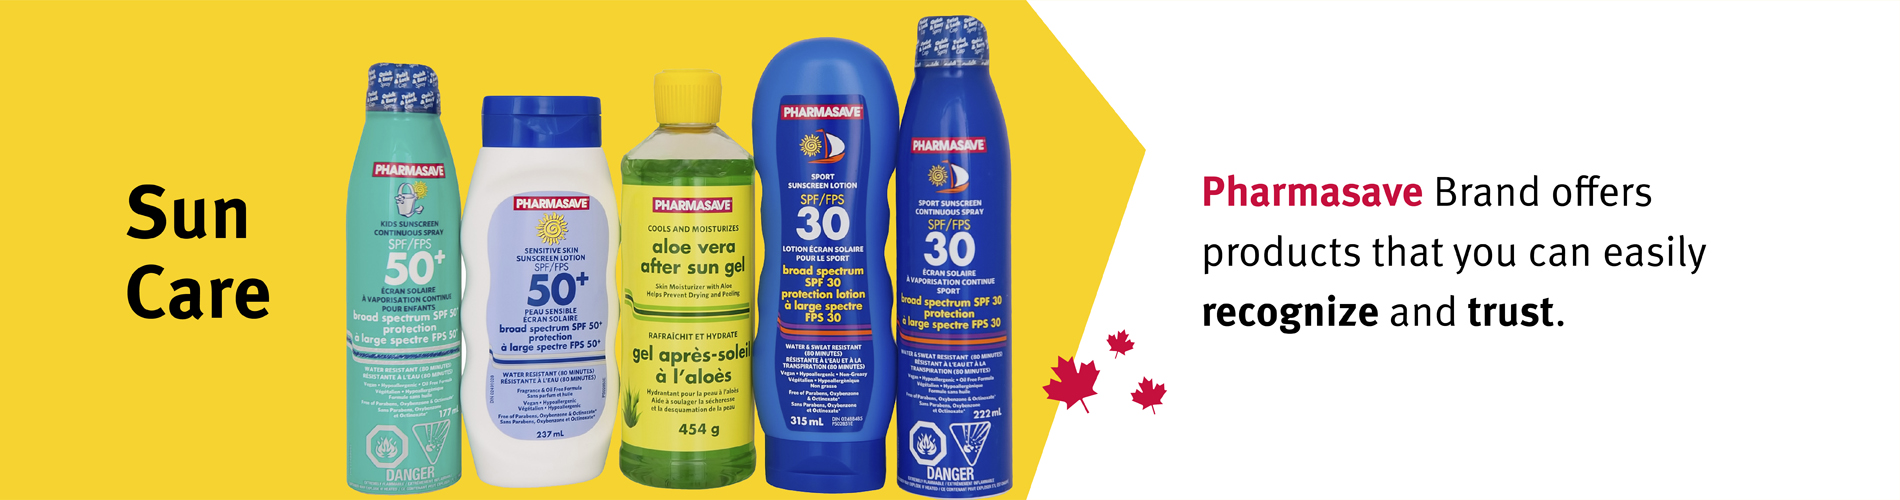 Pharmasave has quality sun care products at a value that you can trust. Shop Pharmasave Brand.